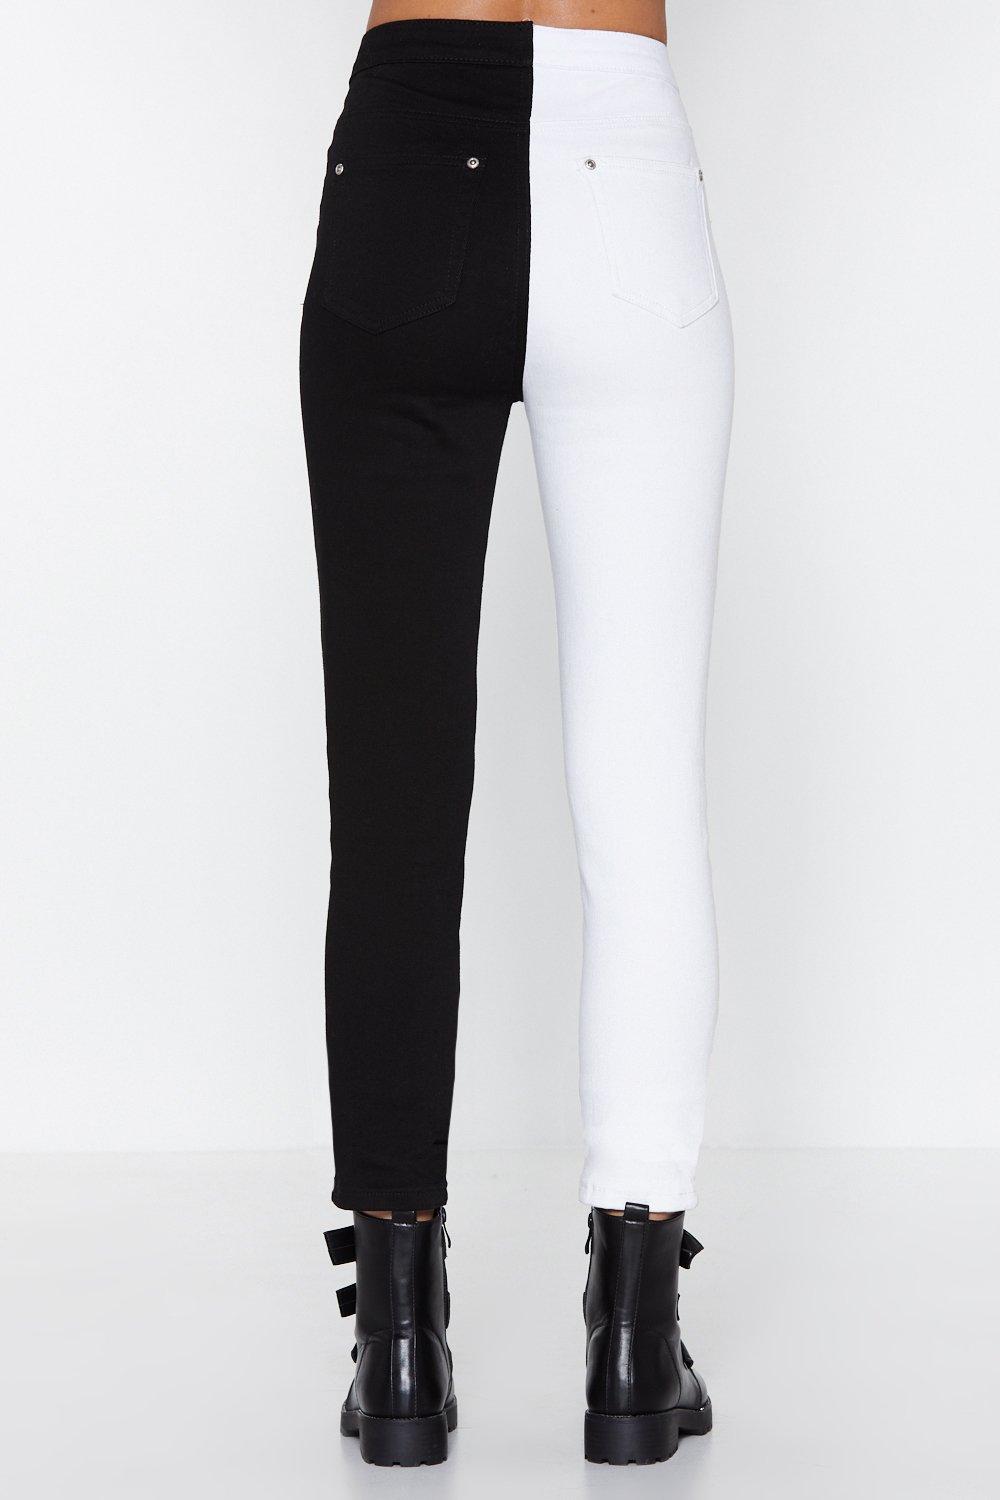 black and white jeans